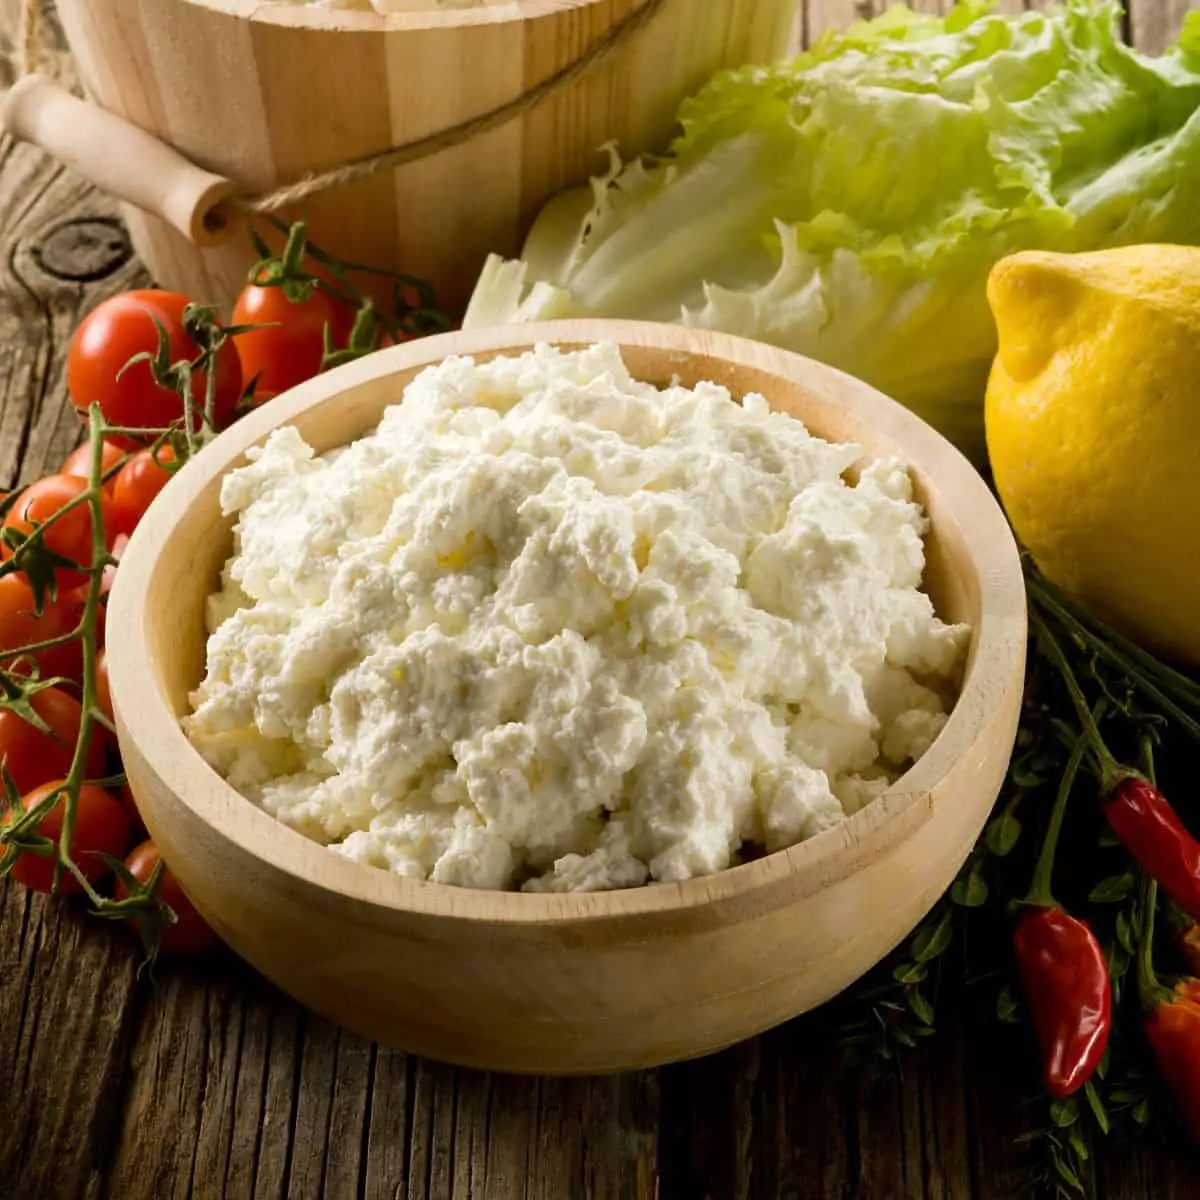 So What The Heck is Ricotta Cheese Anyways?